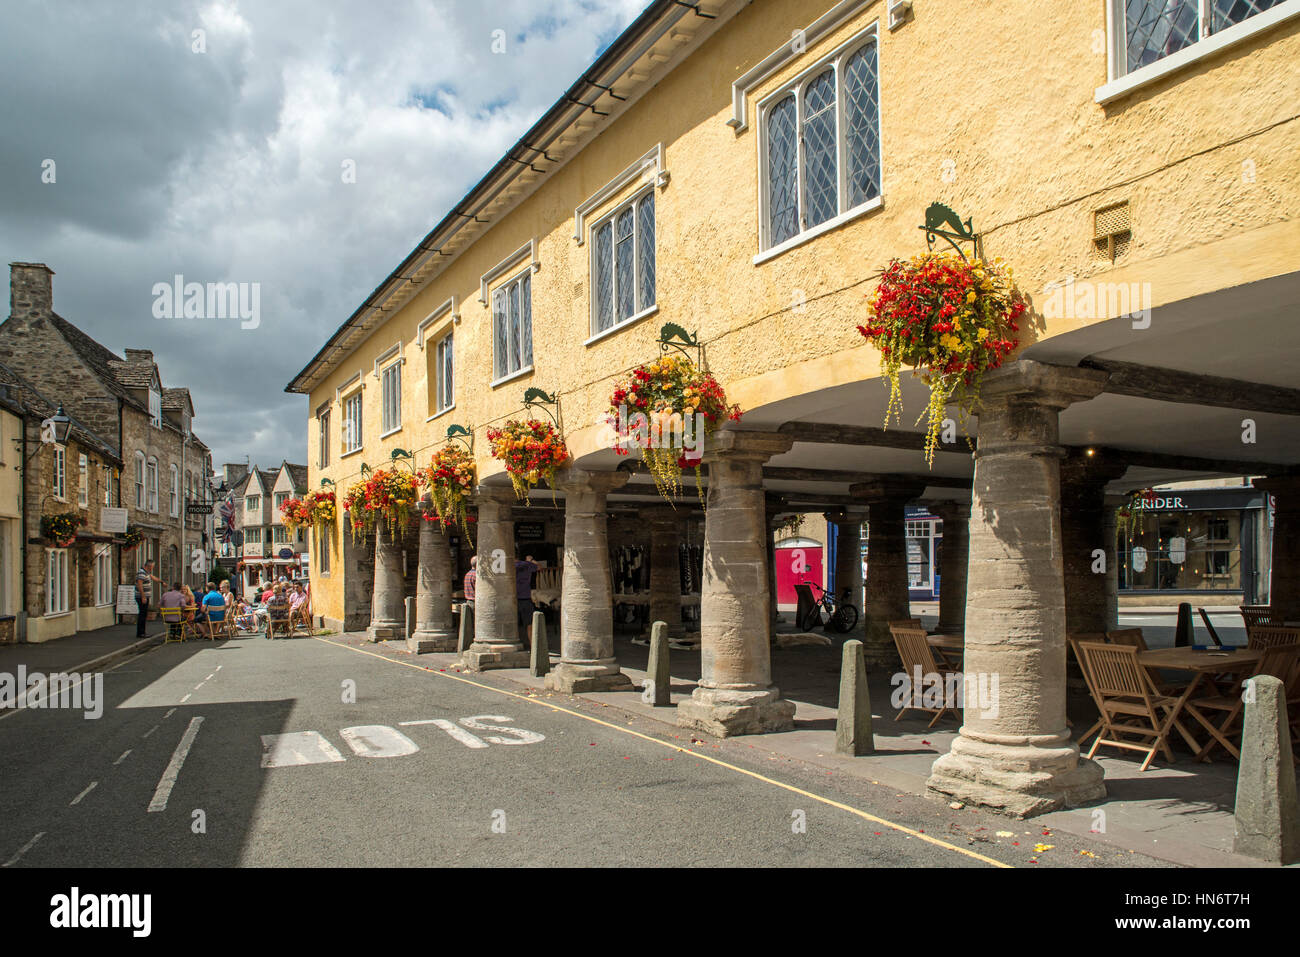 Tetbry Town Center, a Cotswolds cittadina rurale nel Gloucestershire, Inghilterra Foto Stock